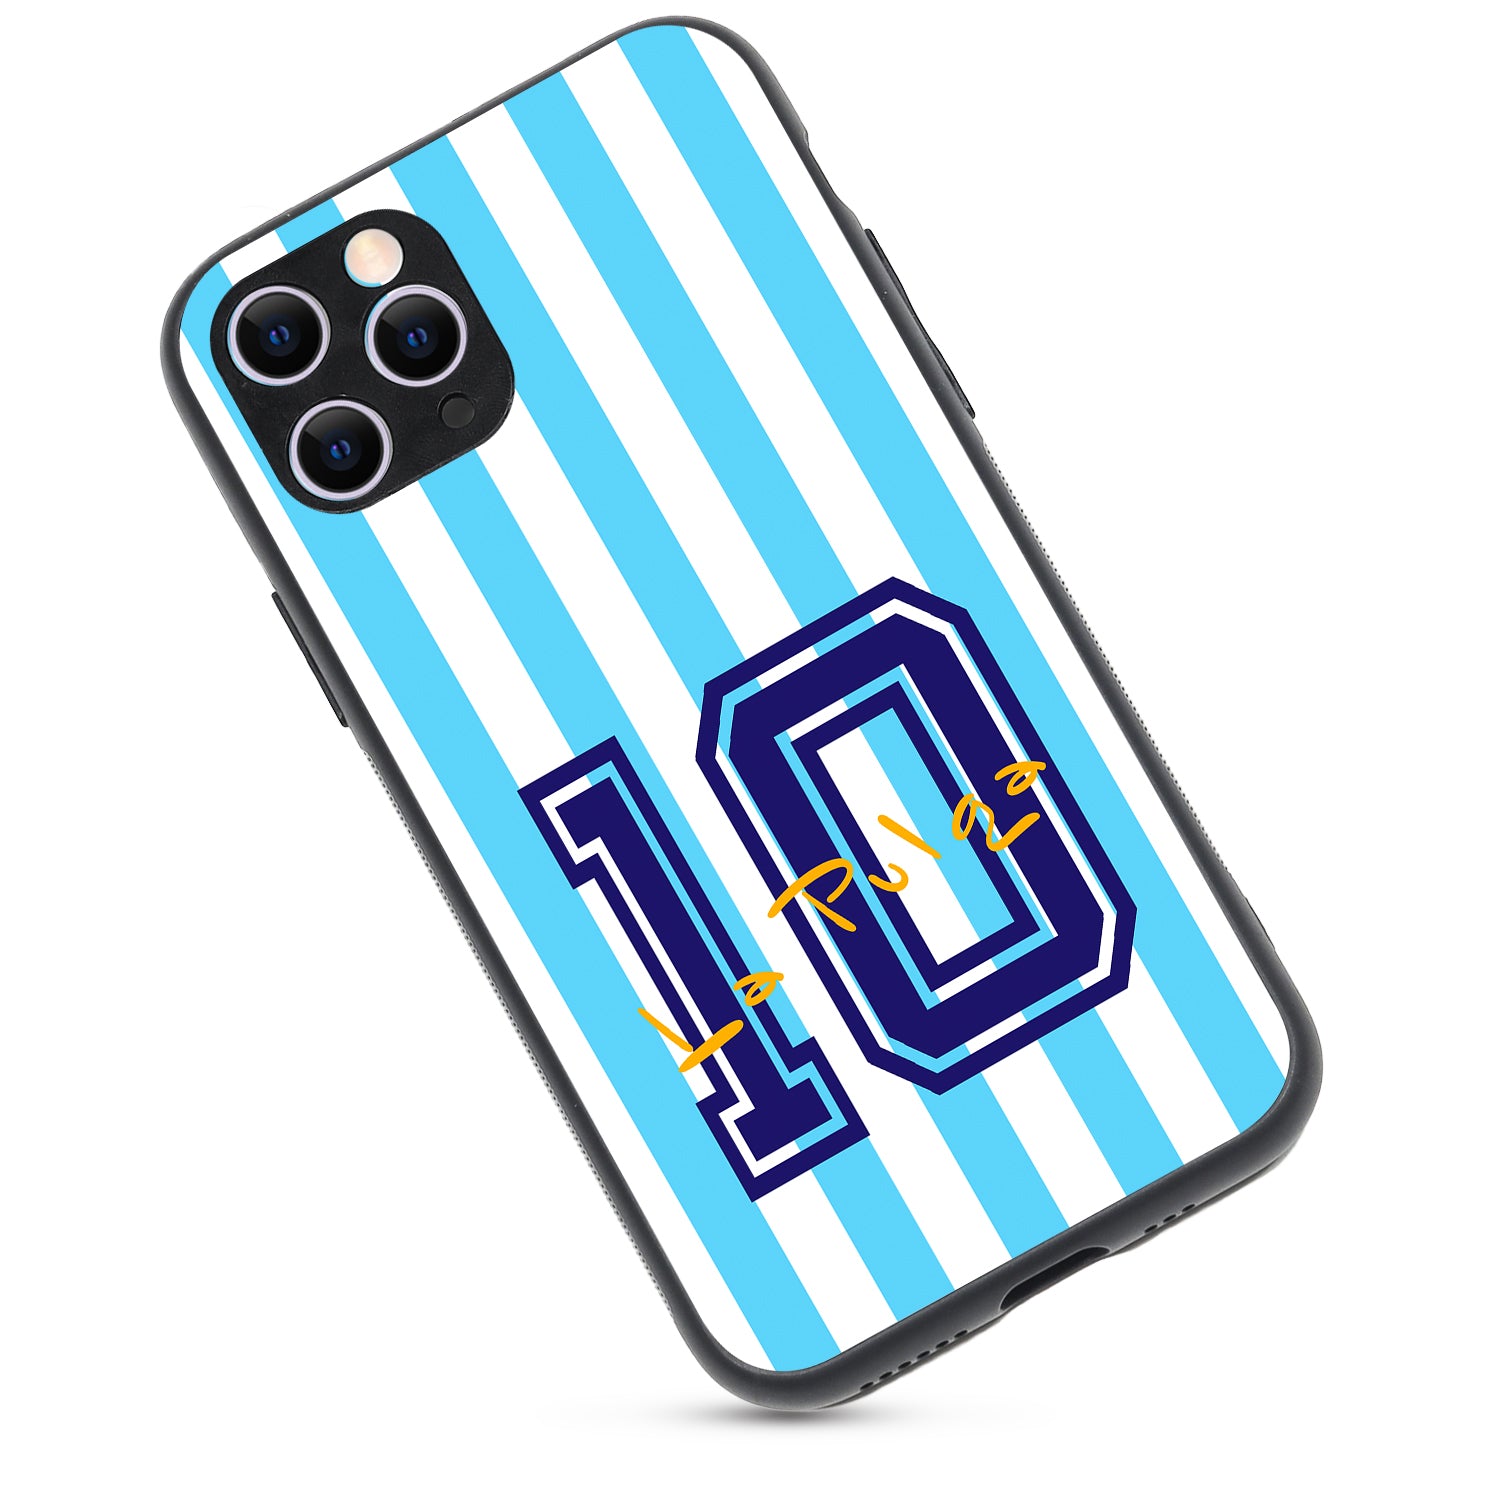 Jersey 10 Sports iPhone 11 Pro Case